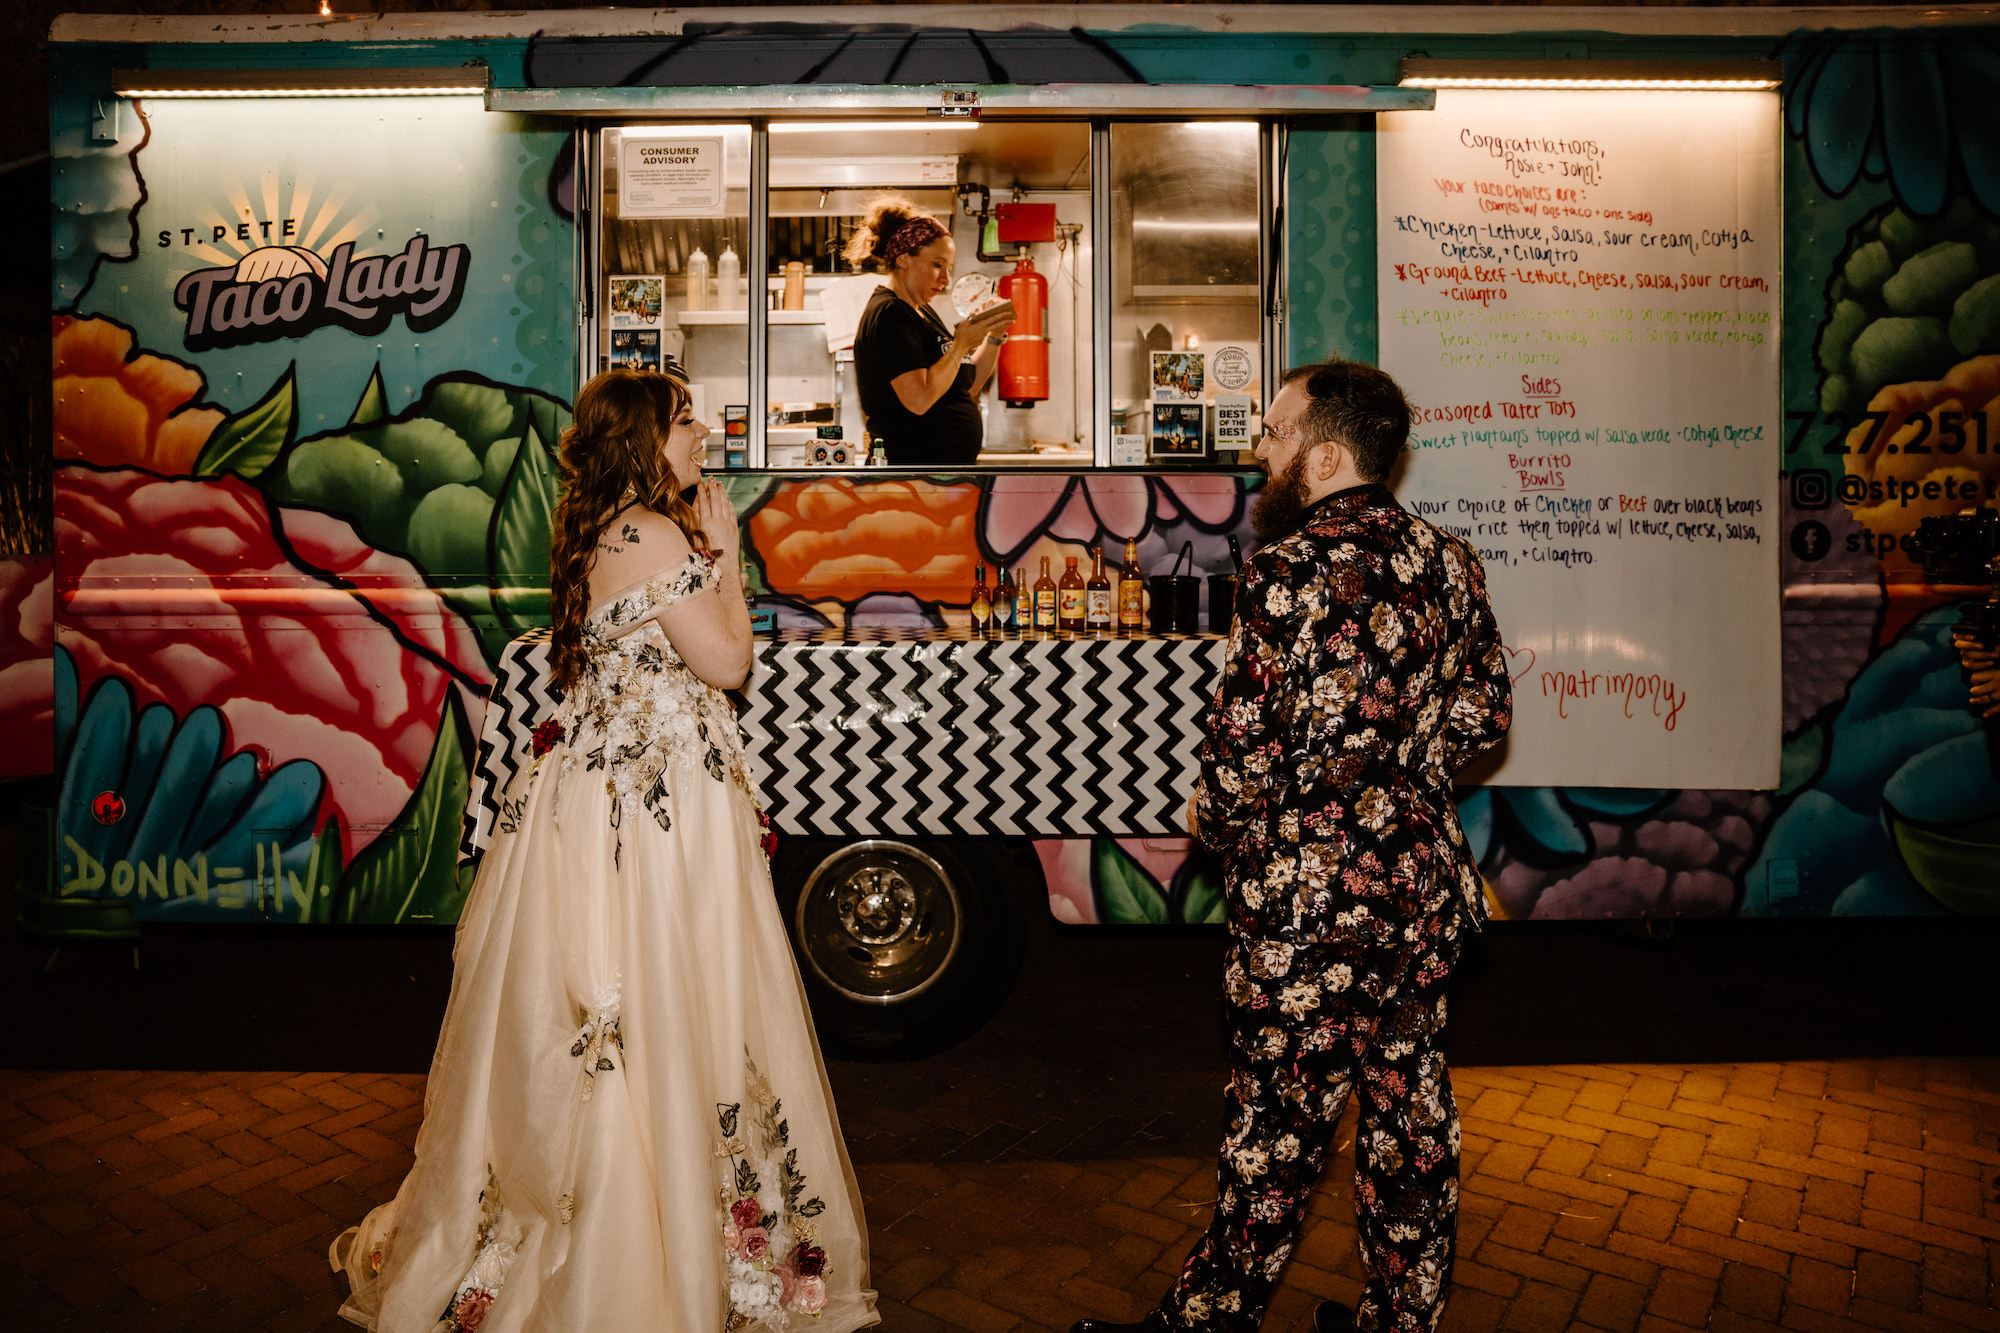 Wedding Reception Dinner Alternative Food Truck | Tampa Bay Caterer St. Pete Taco Lady